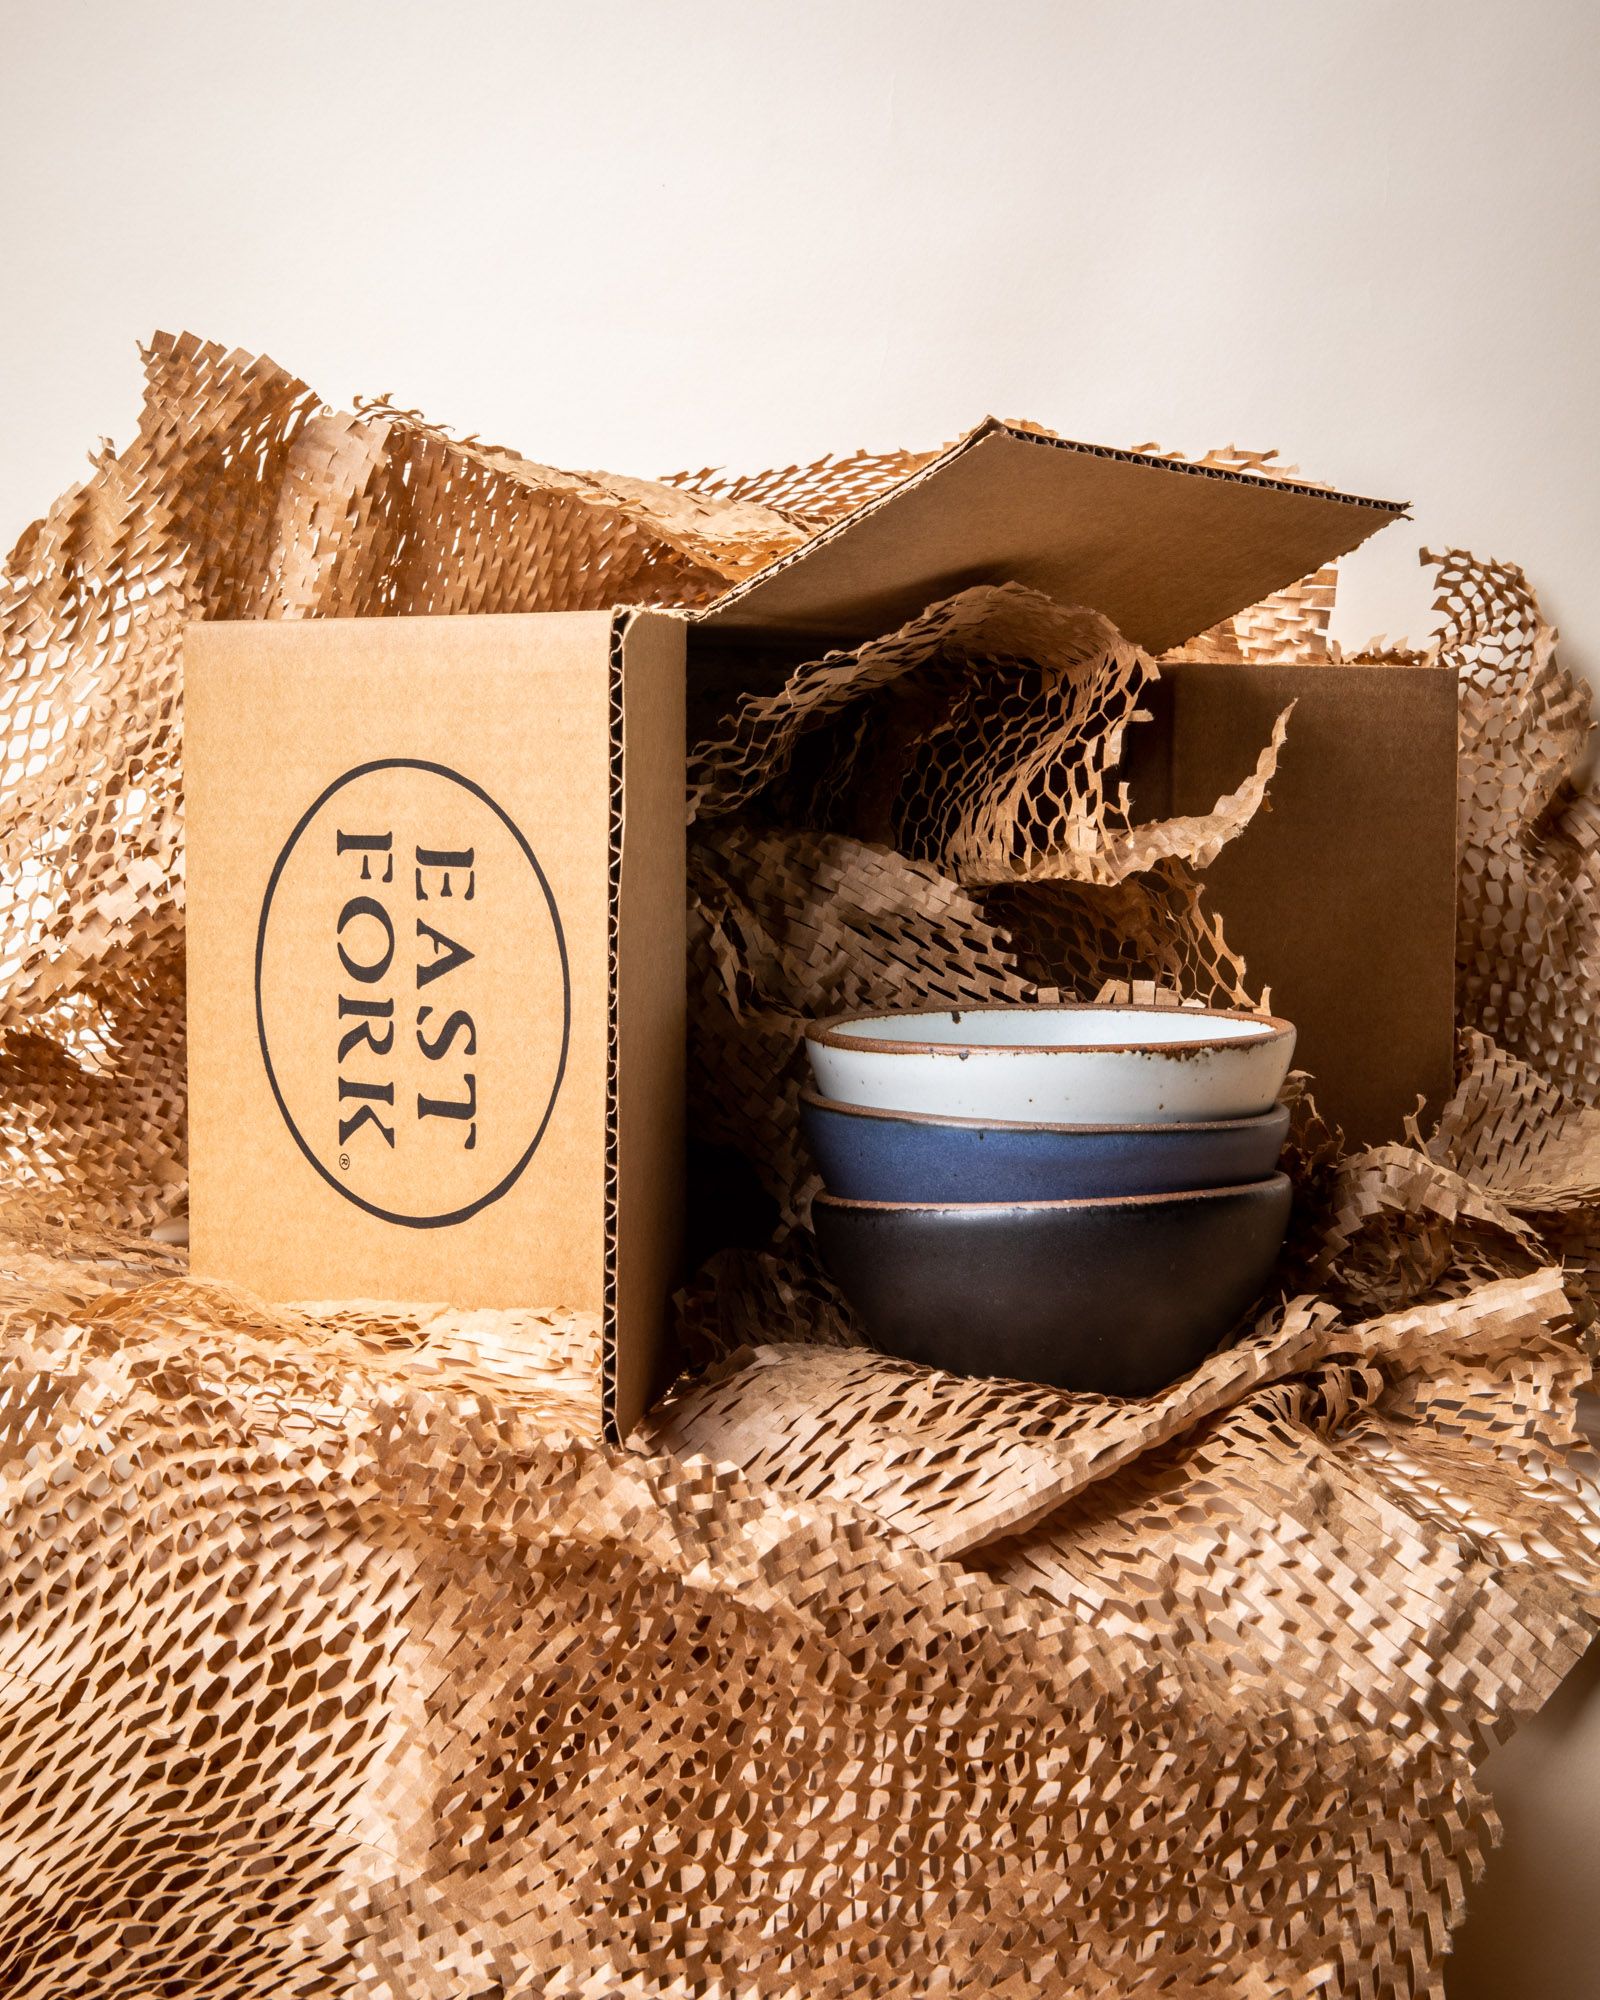 A kraft box that says "East Fork on its side with 3 ceramic bowls in white, blue, and black. All laying in geami paper packaging.